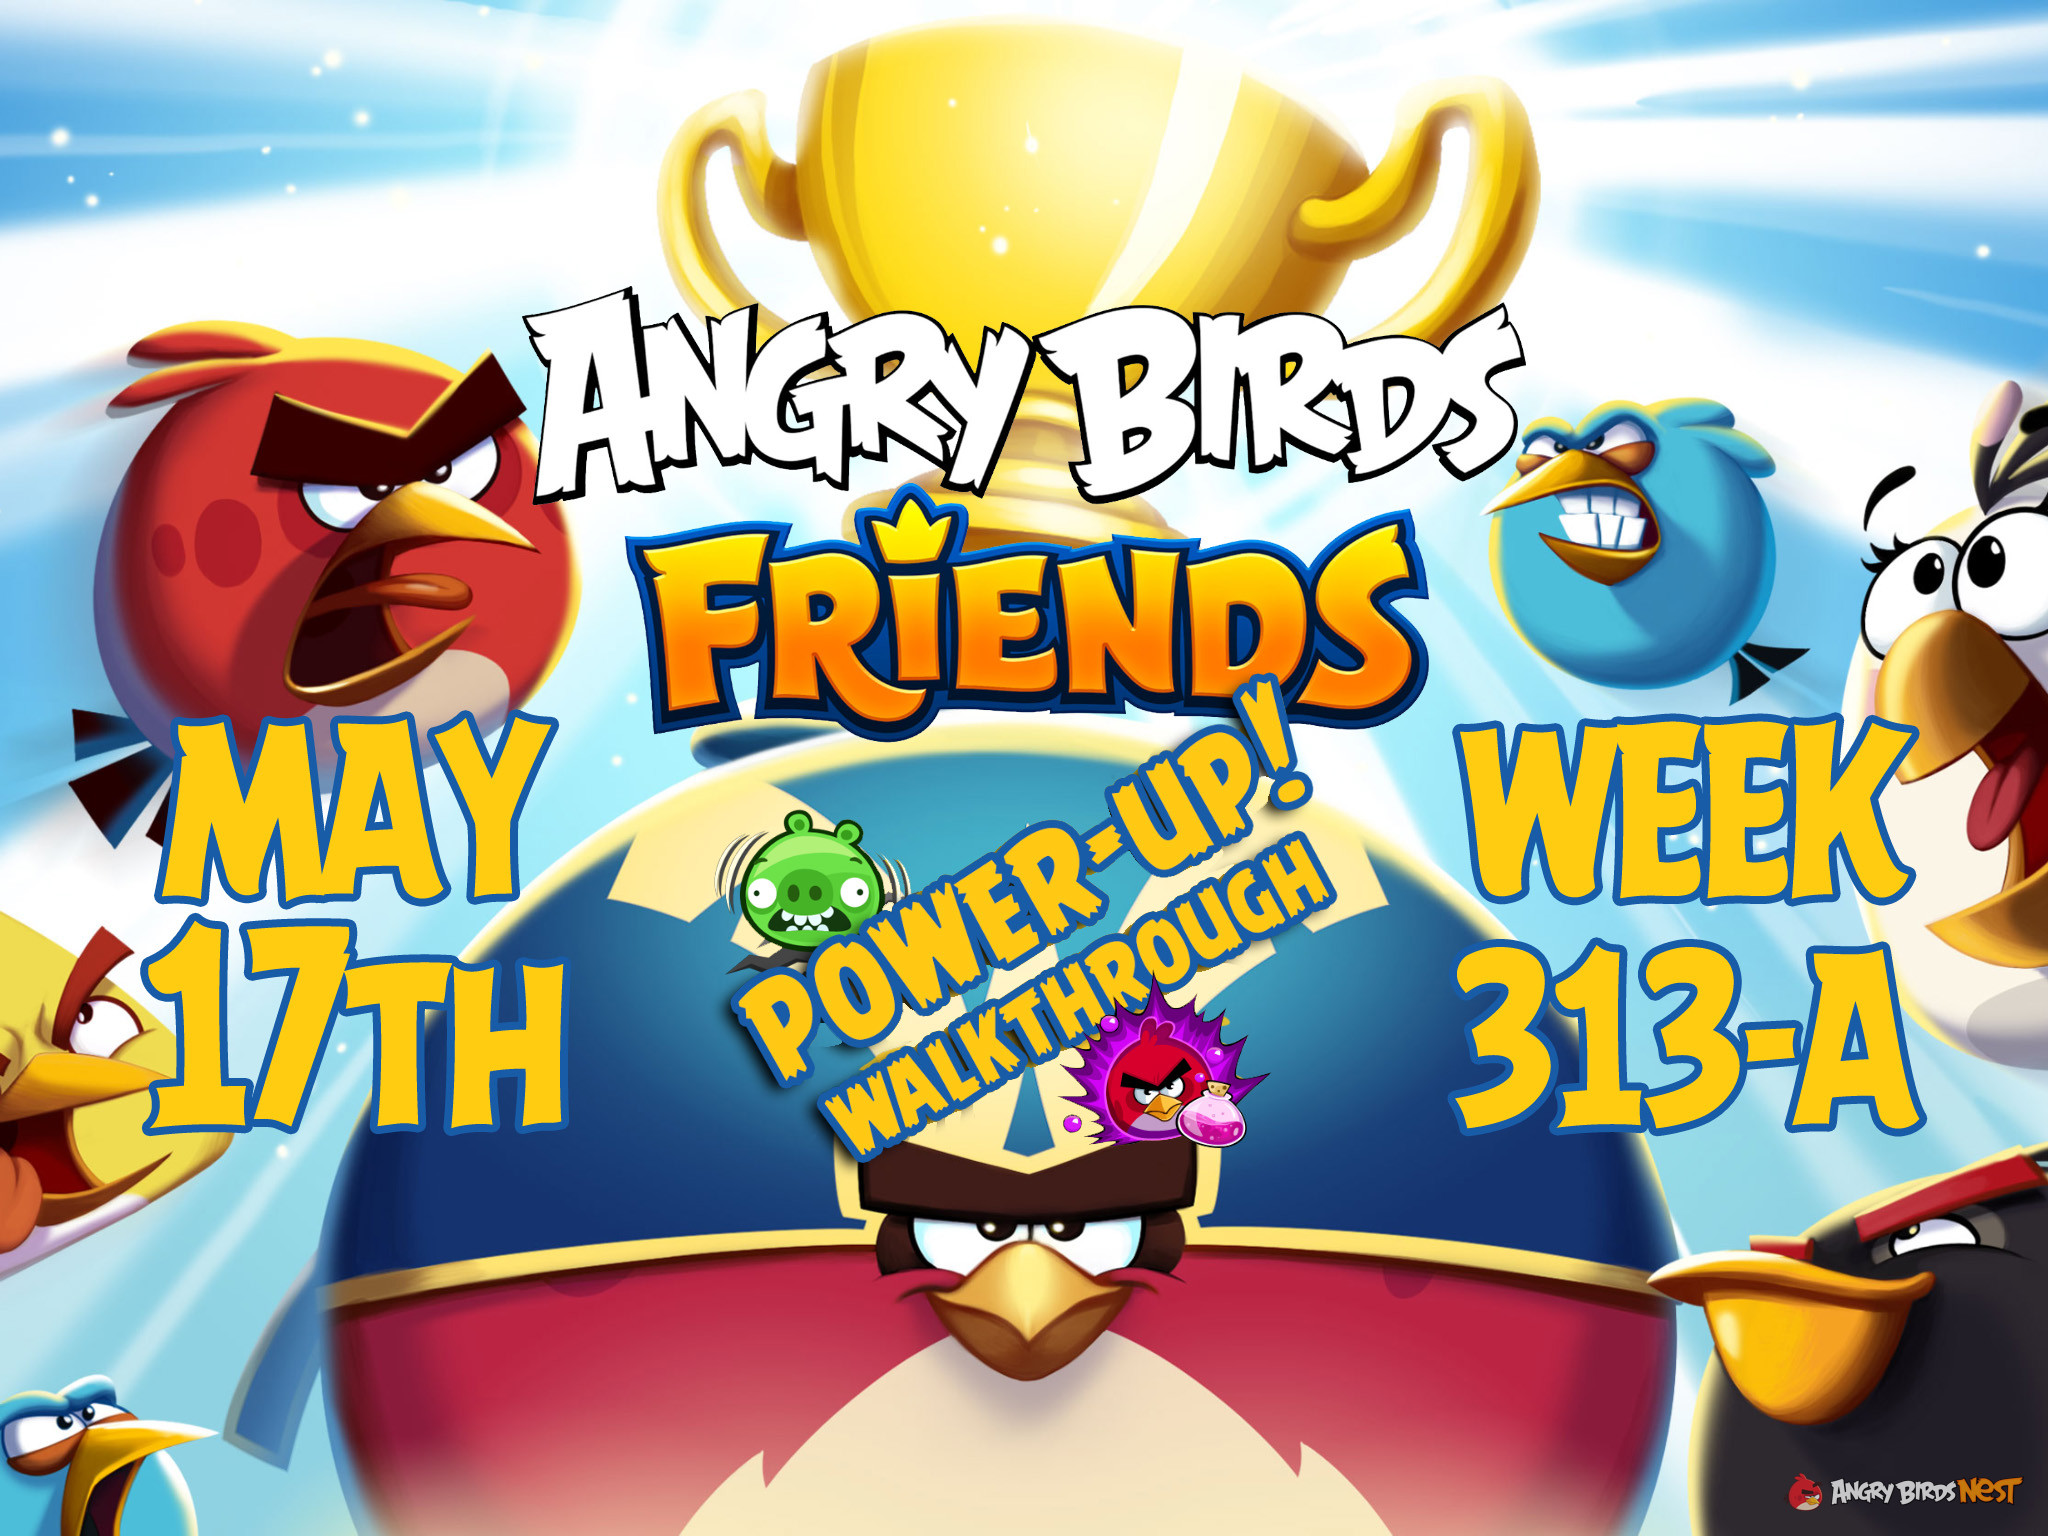 Angry Birds Friends Tournament Week 313-A Feature Image PU